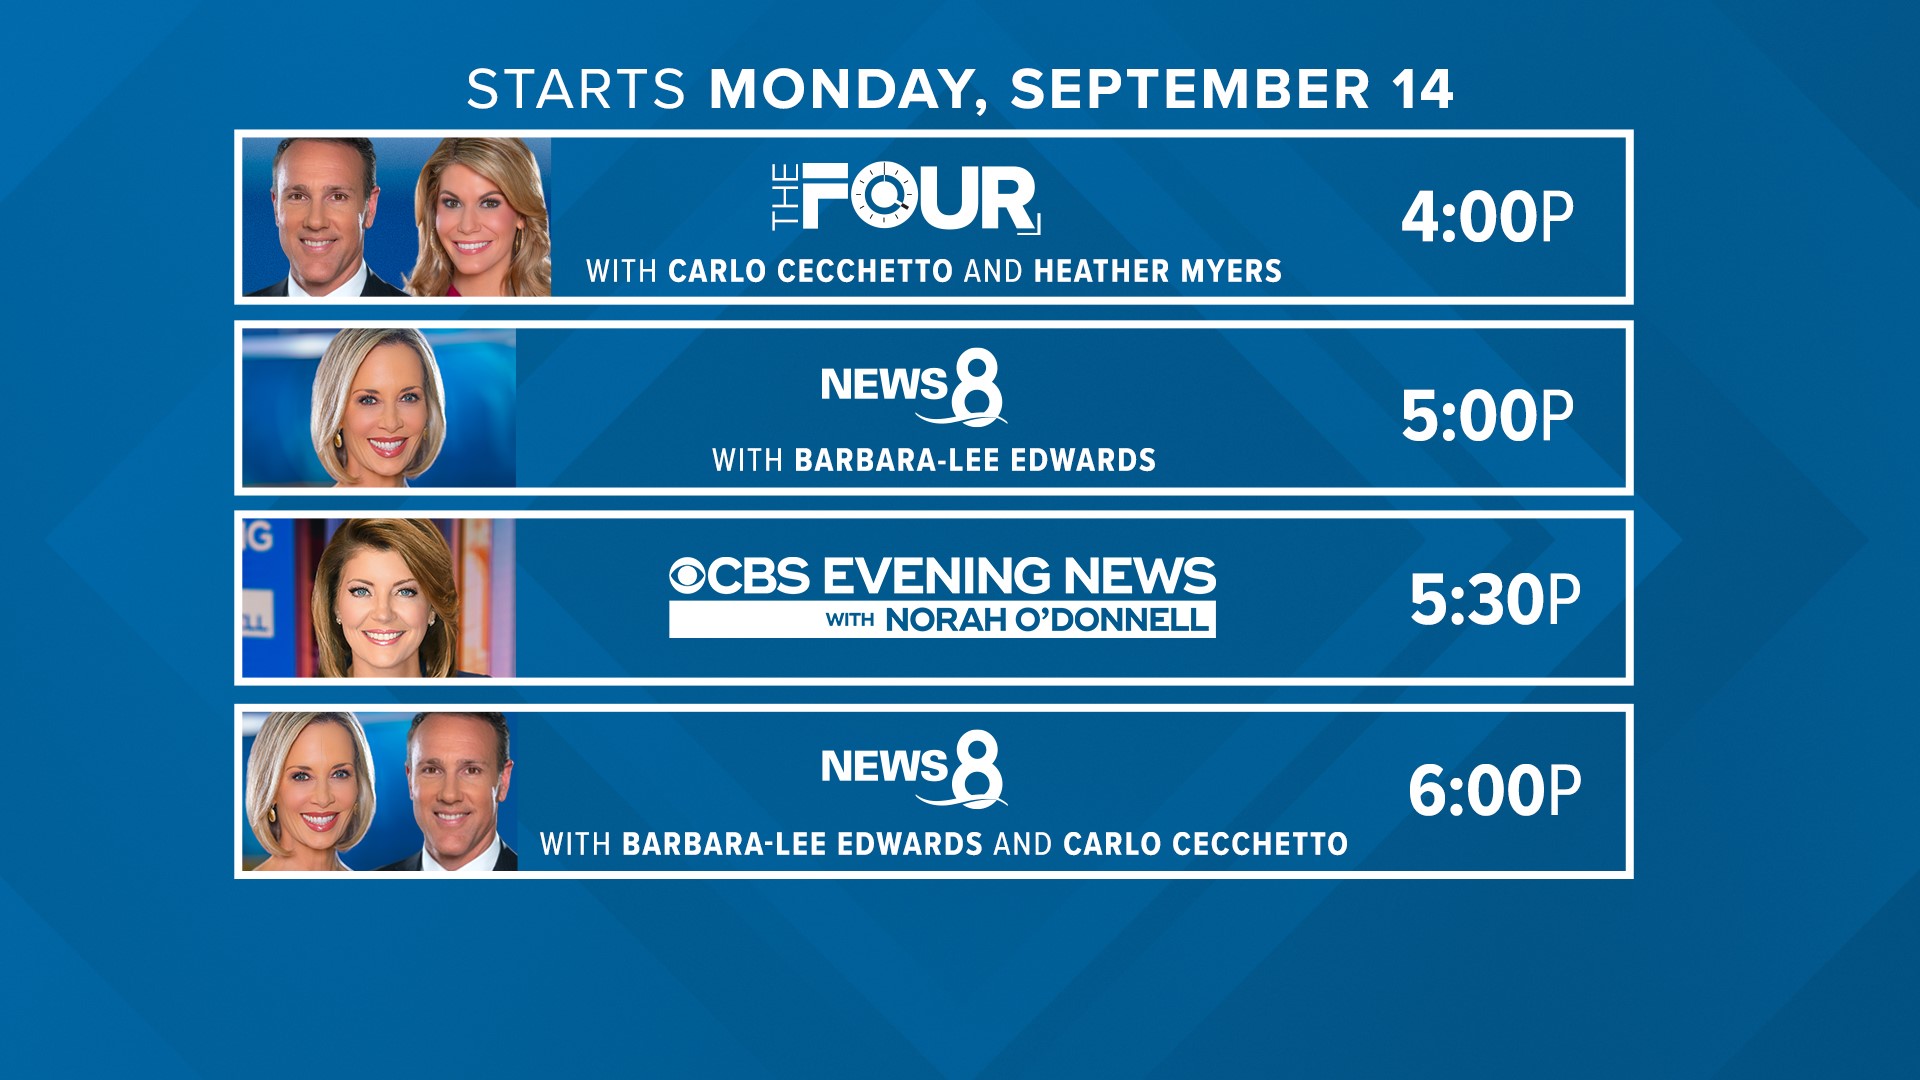 There are some changes coming to the weekday lineup on CBS 8 starting on September 14.